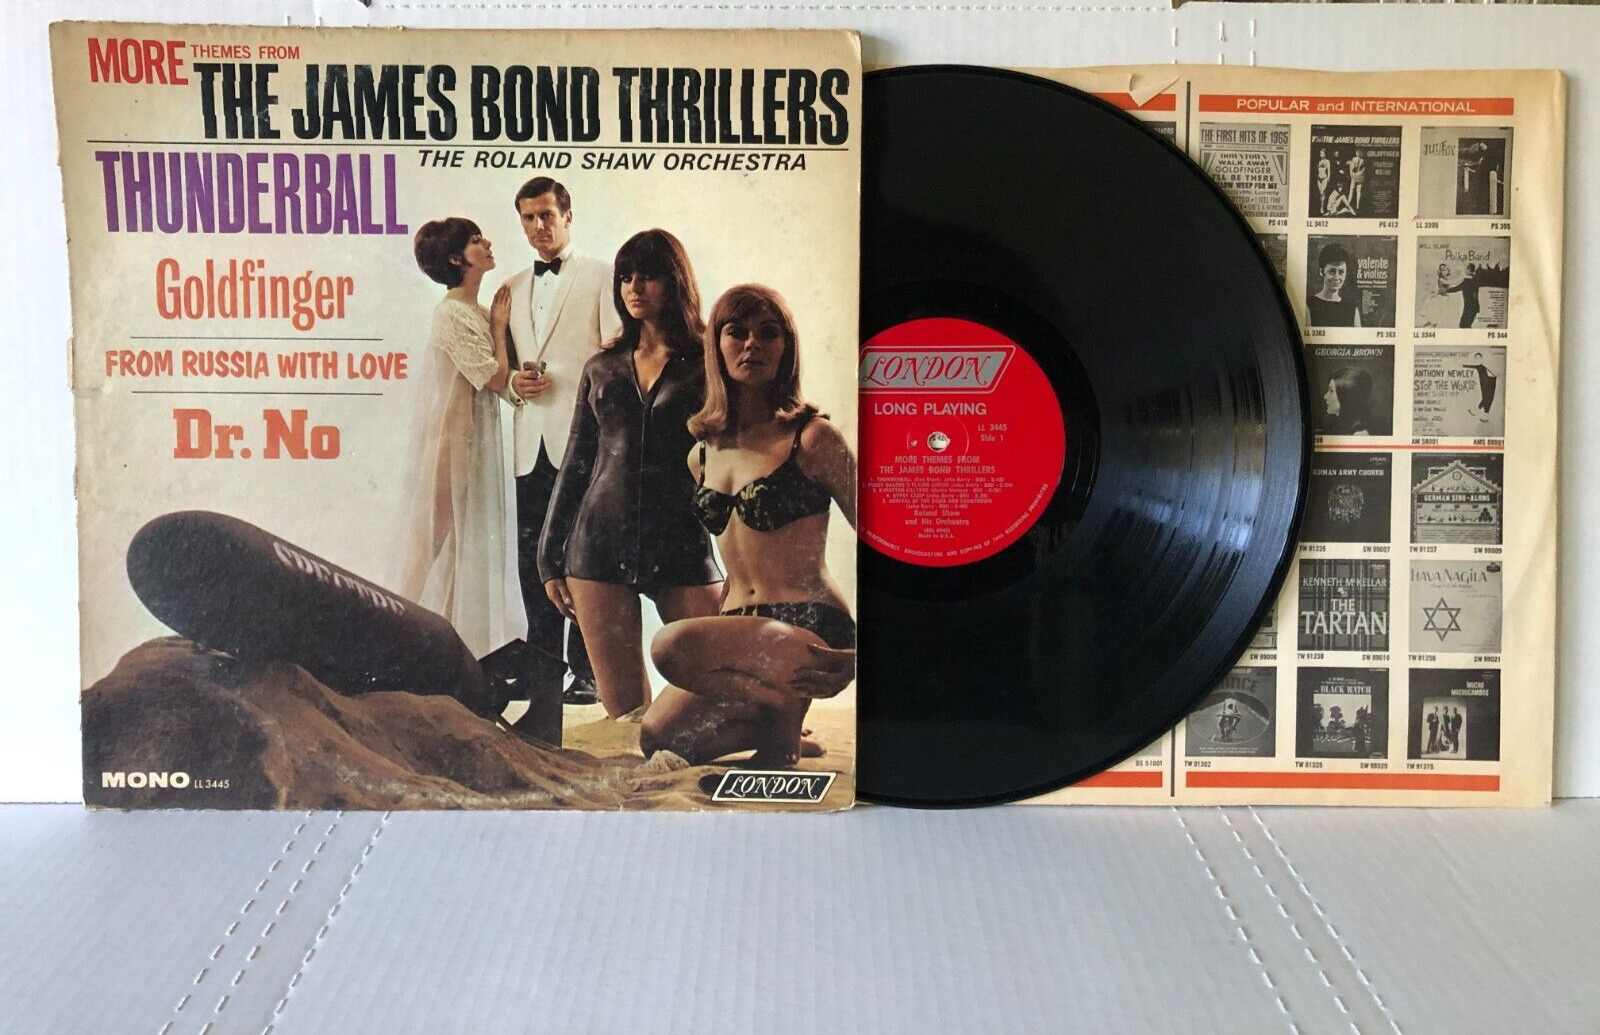 MORE THEMES FROM THE JAMES BOND THRILLERS 1965 London LOW GRADE $2 CLEARANCE